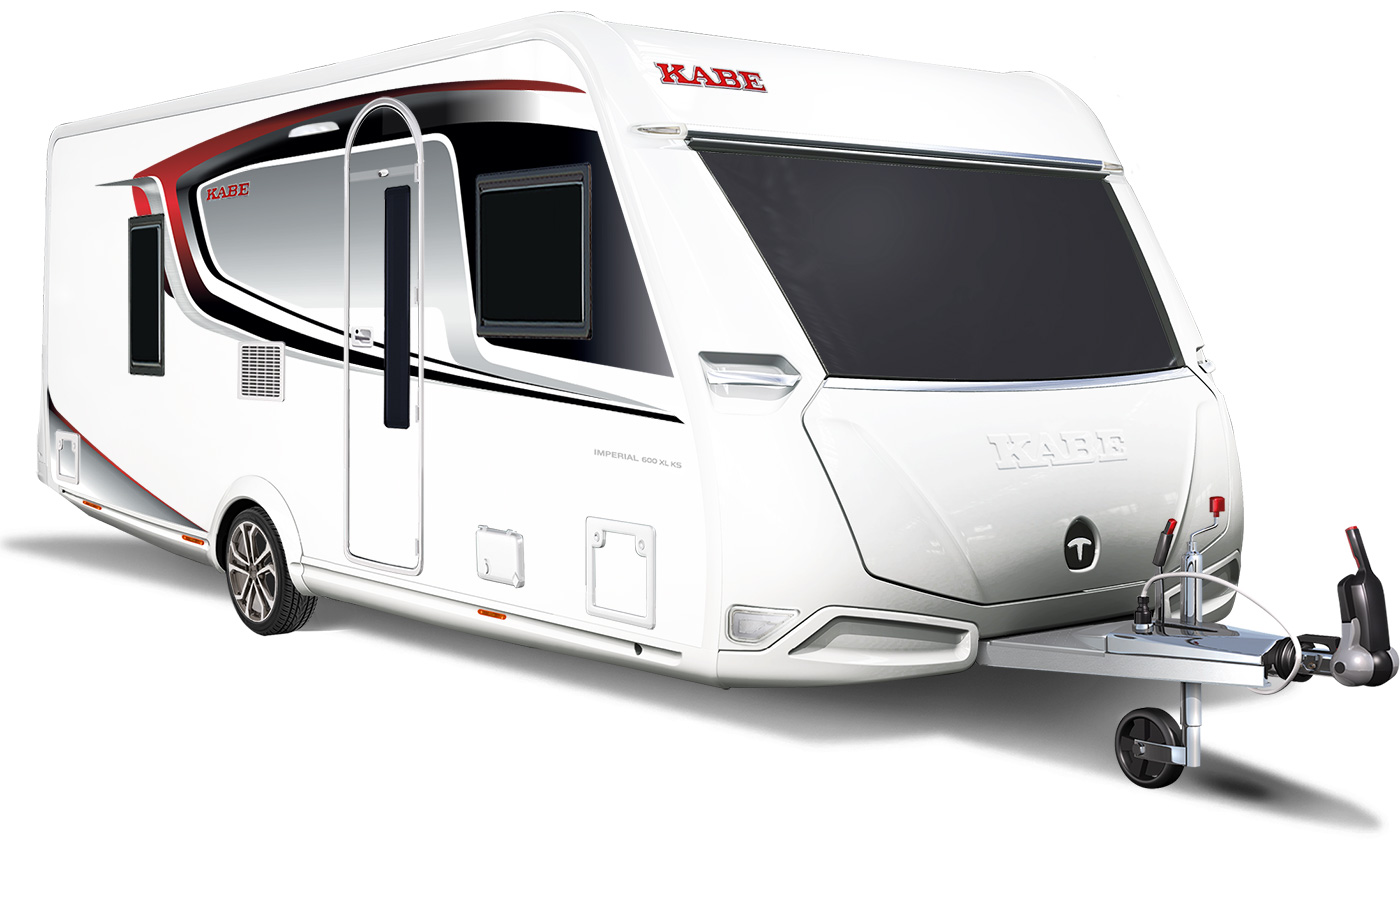 Kabe Imperial 600 XL